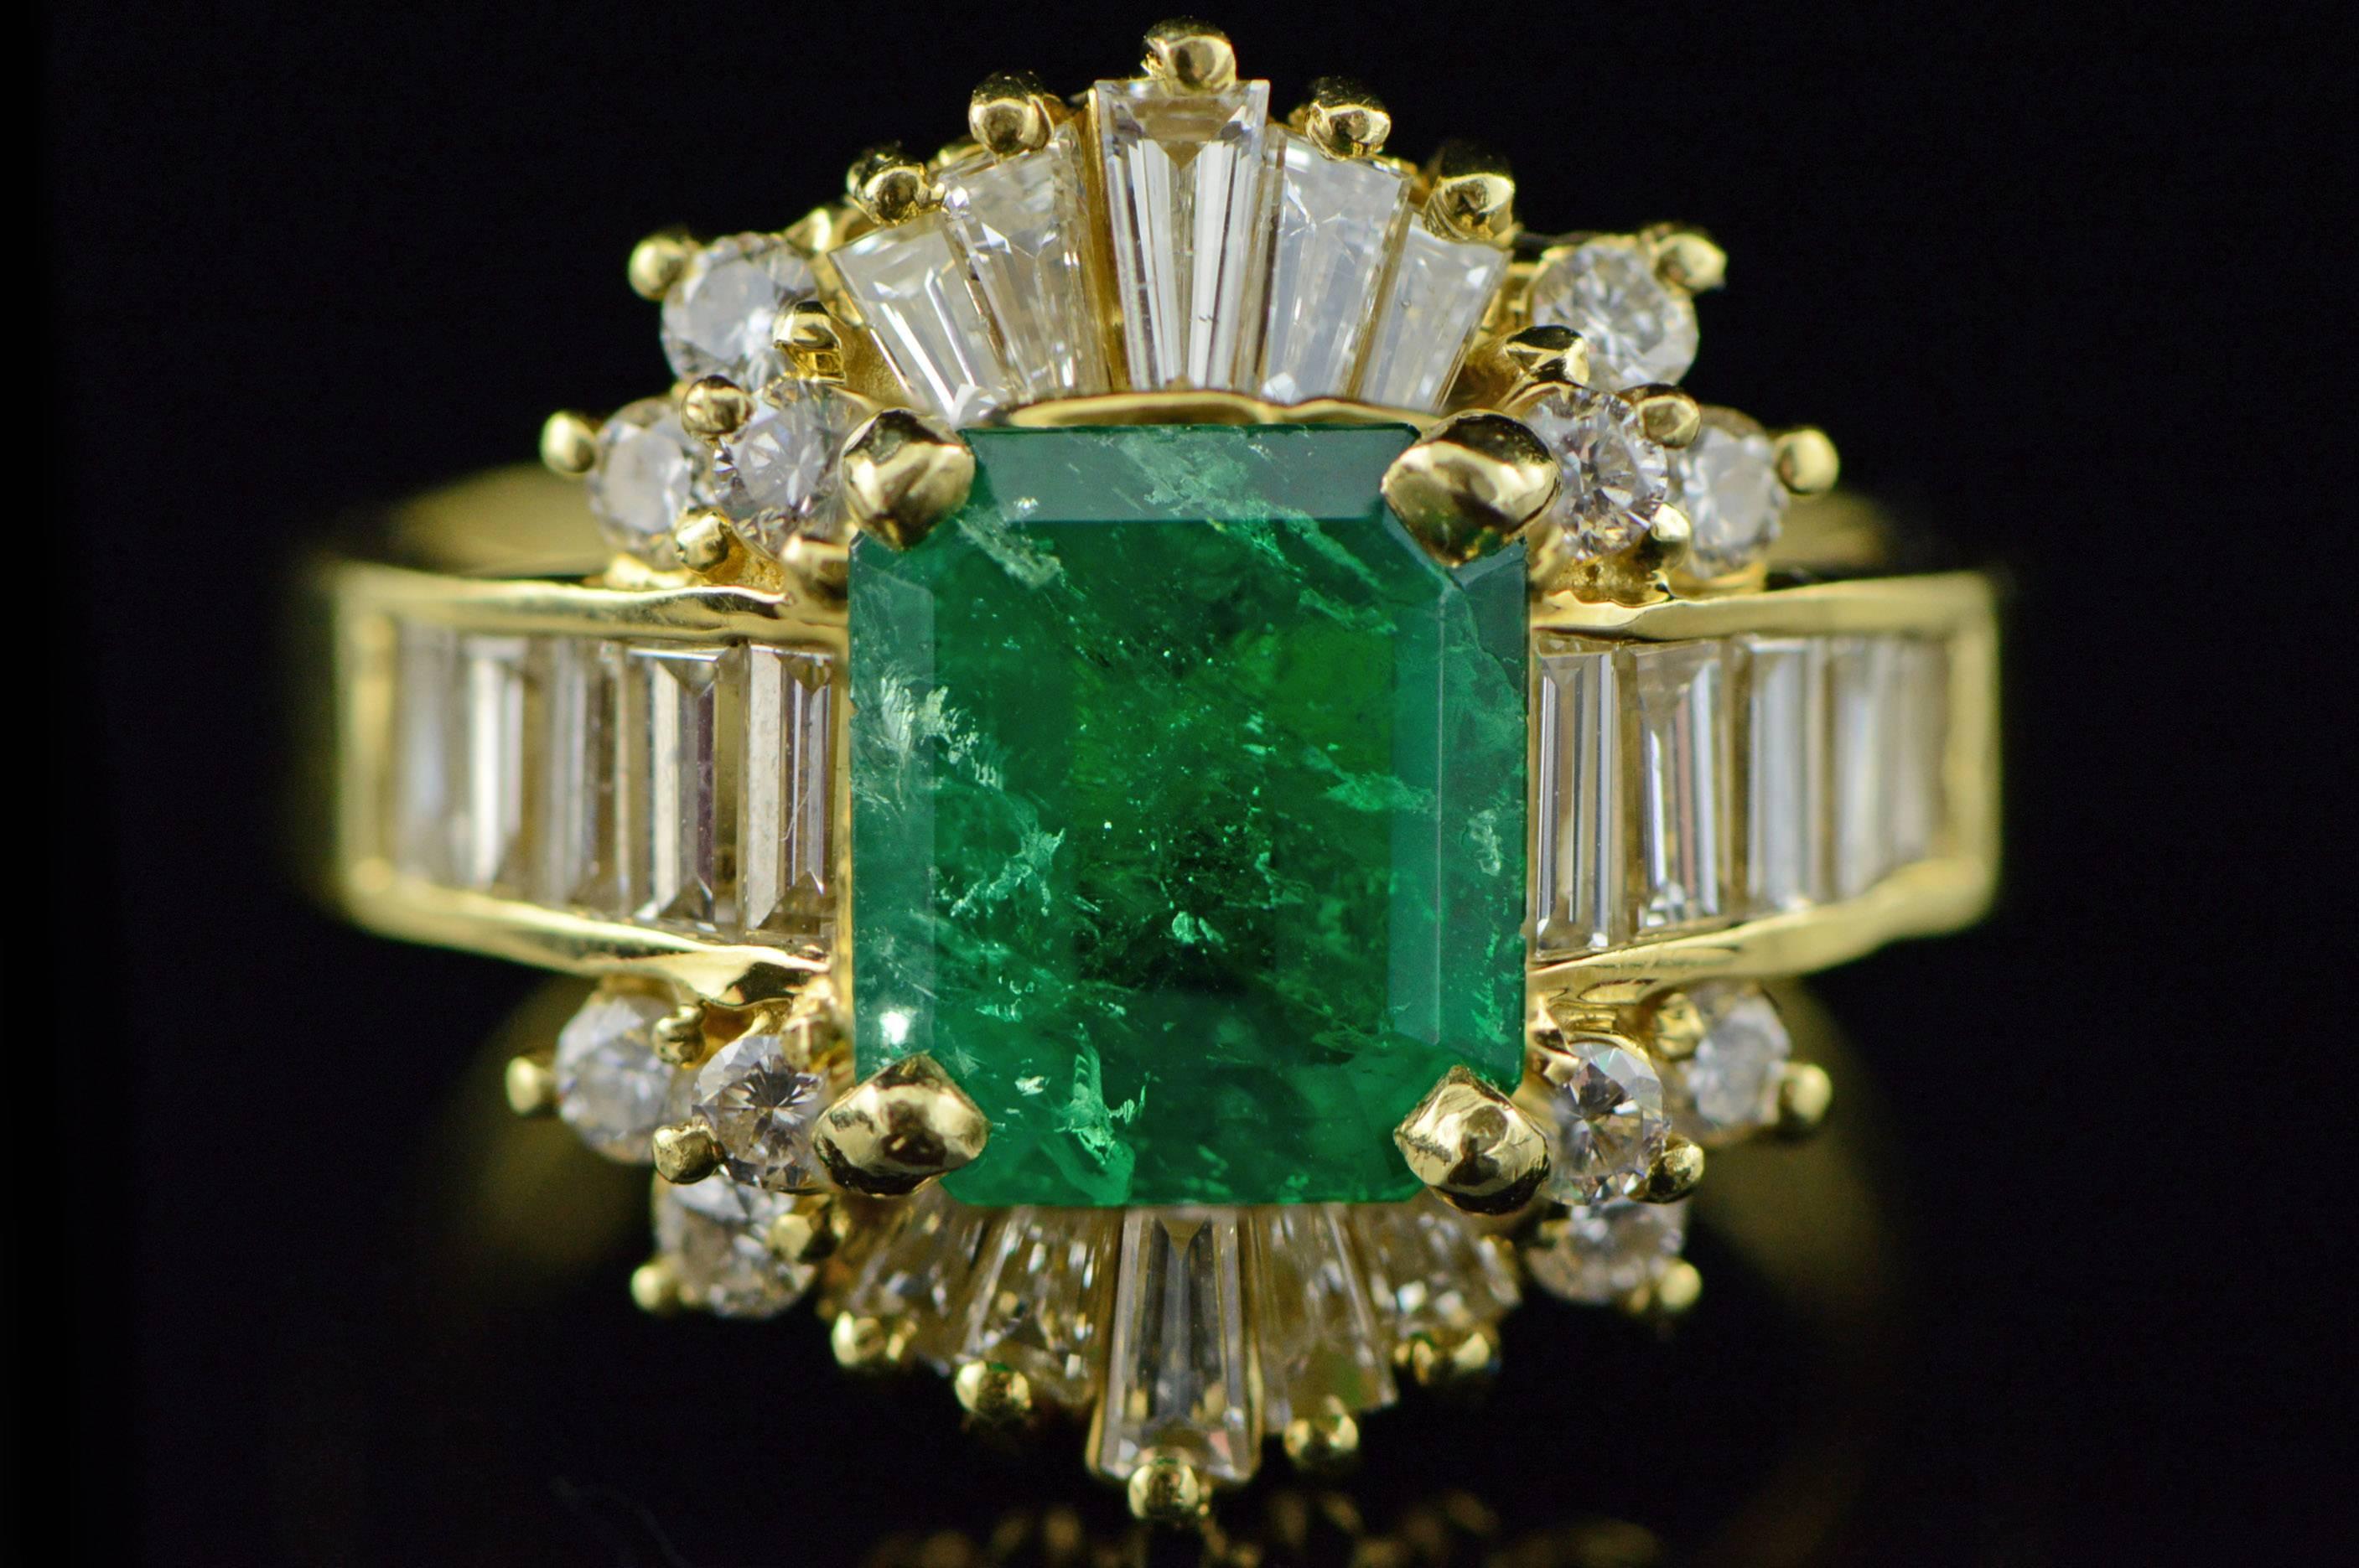 All diamonds are graded according to GIA grading standards. (When applicable)

·Item: 18K 2.17 Ct Emerald 1.47 Ctw Diamond Statement Ring Size 6 Yellow Gold

·Era: Vintage / 1980s

·Composition: 18k Gold Marked/Tested

·Center Gem Stone: 2.17Ct